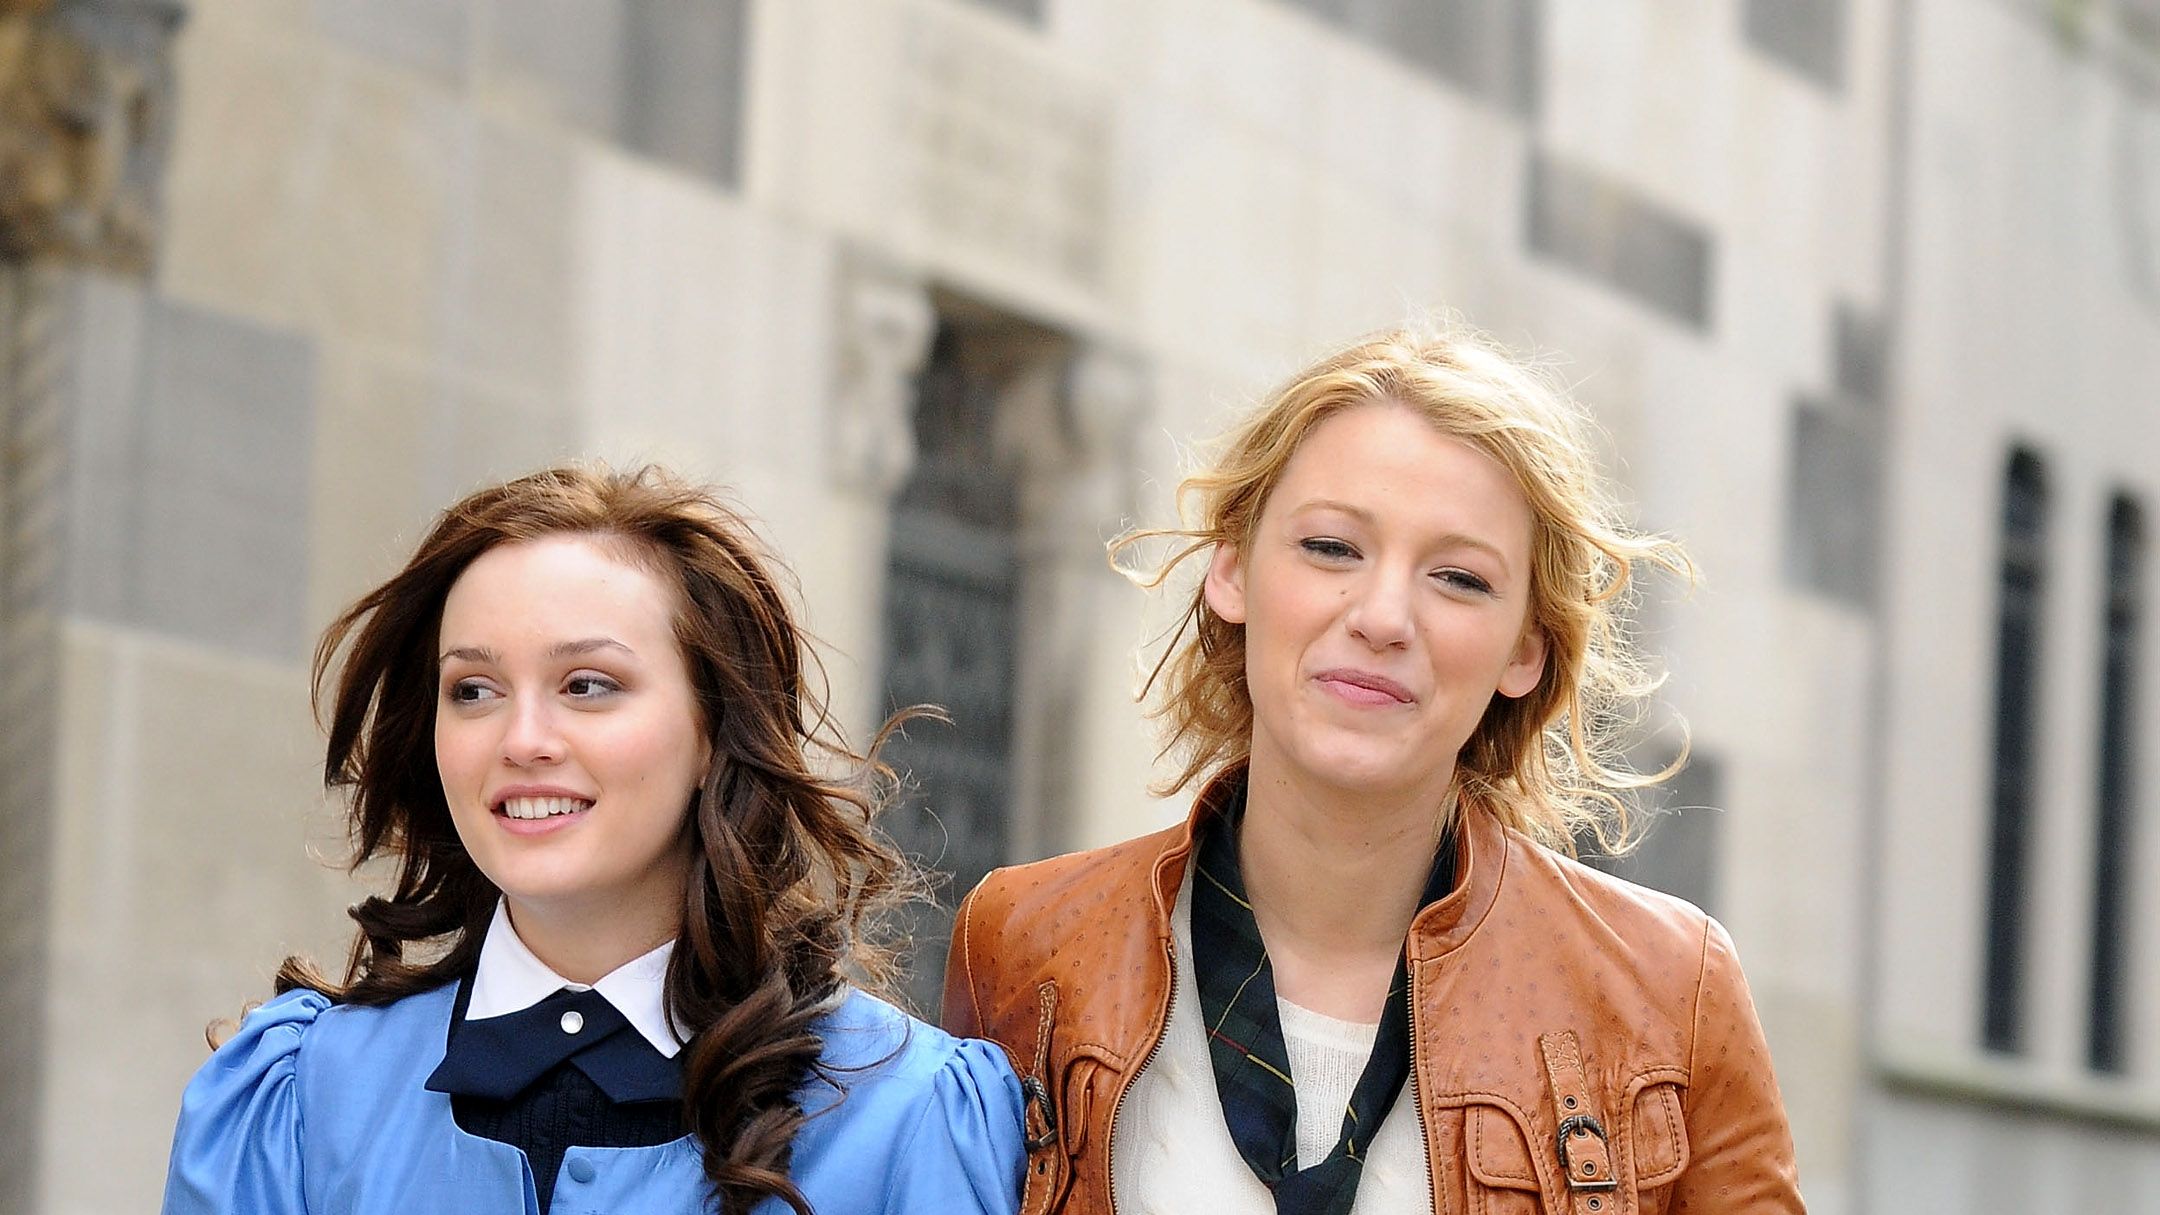 Gossip Girl' recap: Yale doesn't want Blair  but Chuck does